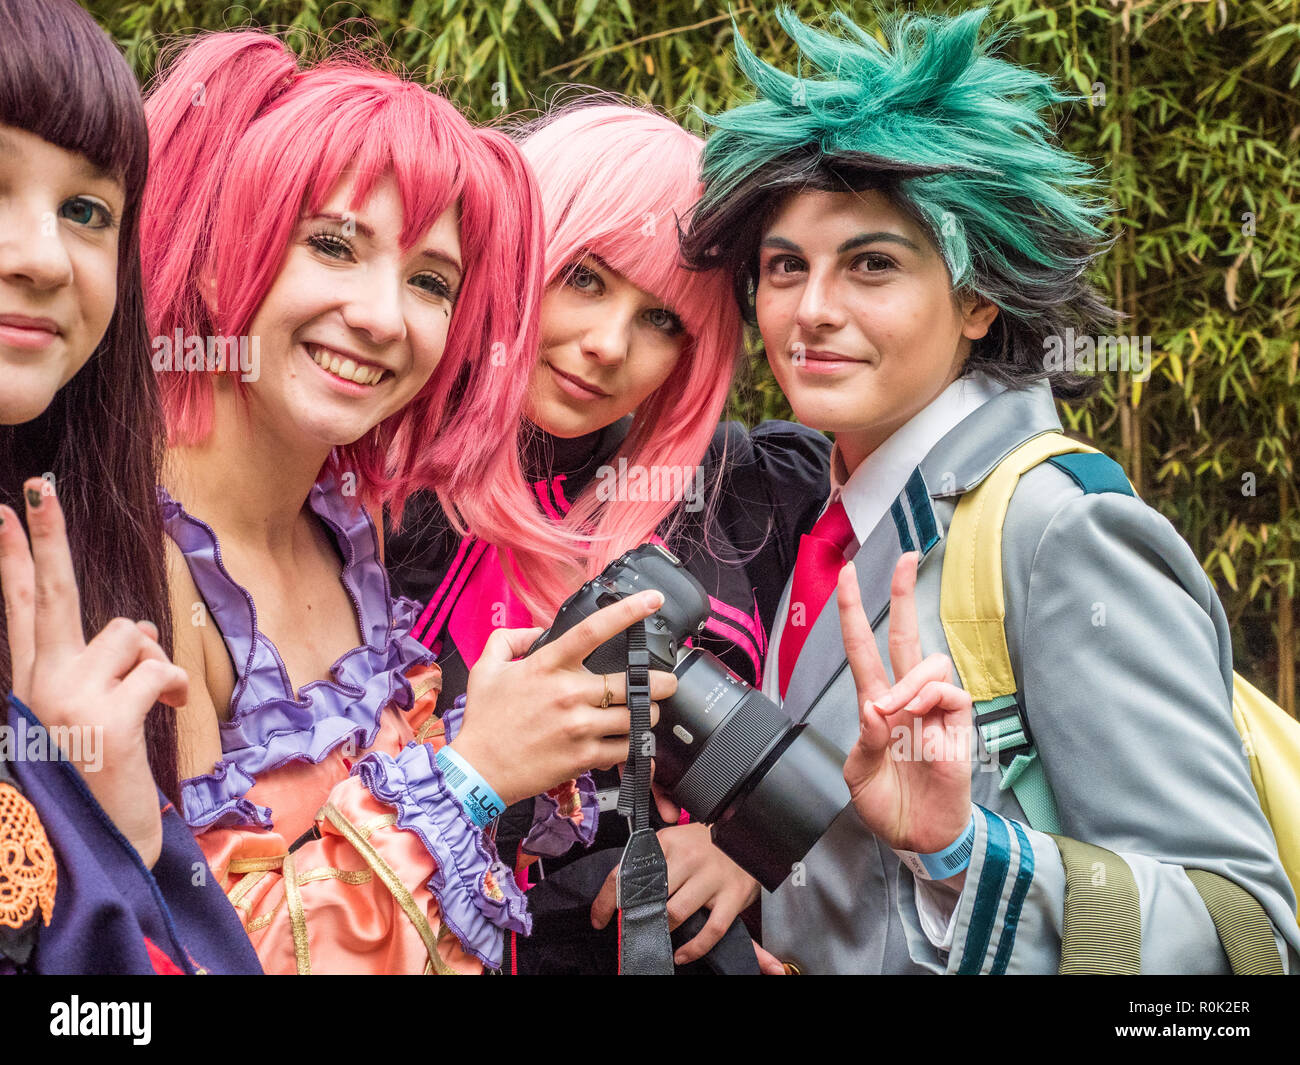 Friends with a camera at the Lucca comics & games, an annual comic book and gaming convention in Lucca, Tuscany, Italy. Stock Photo